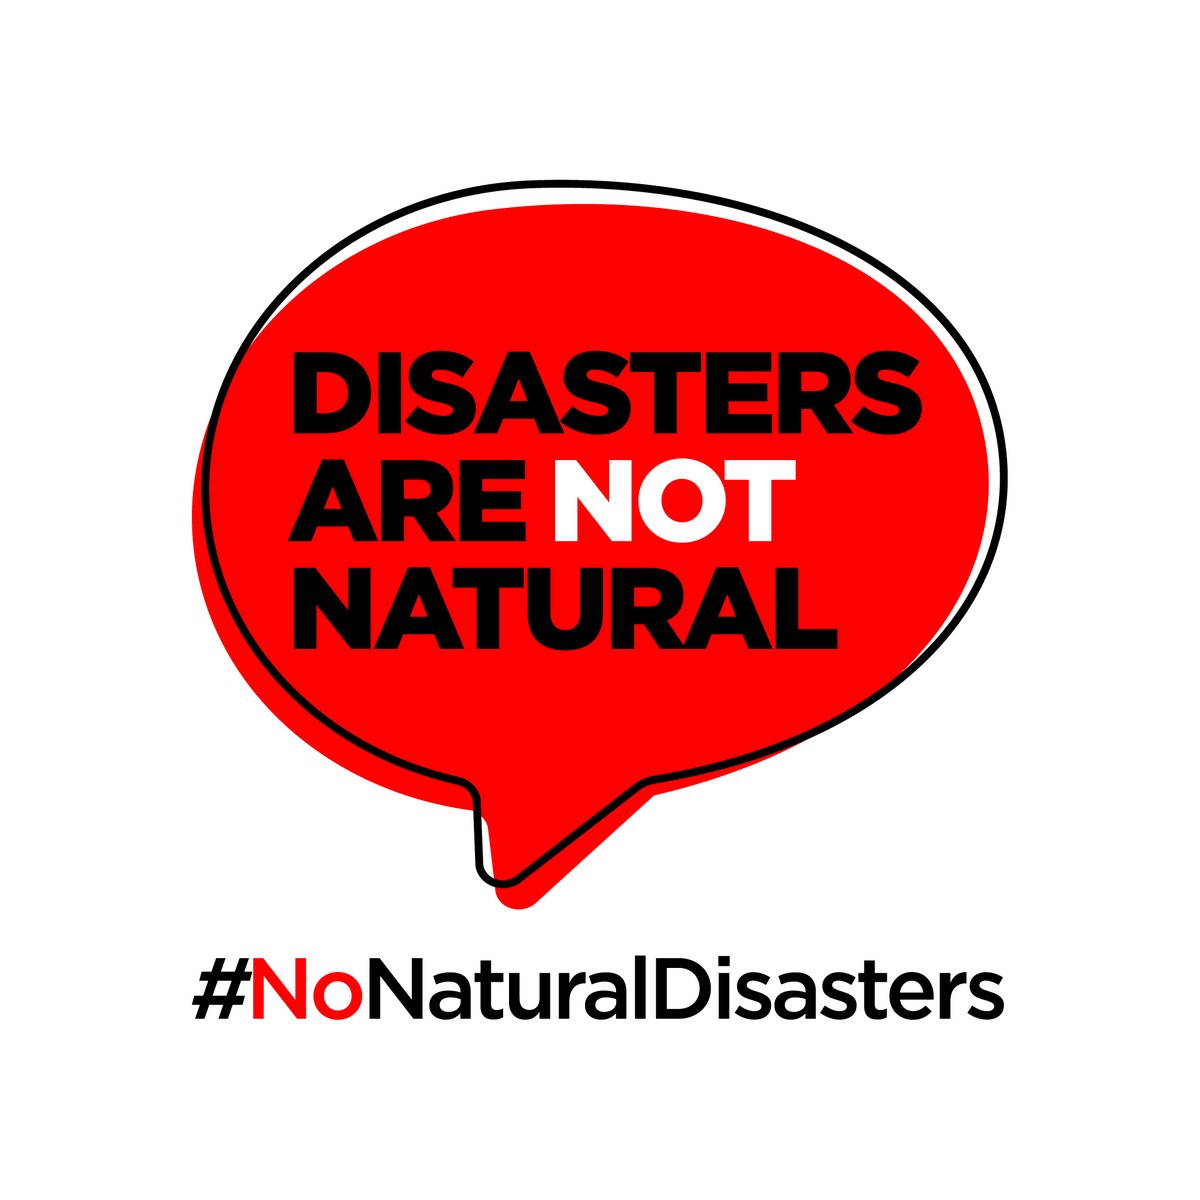 So we have a lot of 'wins ' under our belt... but we can't help feeling slightly hopeless on days like today.

The no. of times orgs working in the disaster space used the ND term today is just 🤯

So next year, we're hijacking #DRRDay & turning it into #NoNaturalDisastersDay 🤣